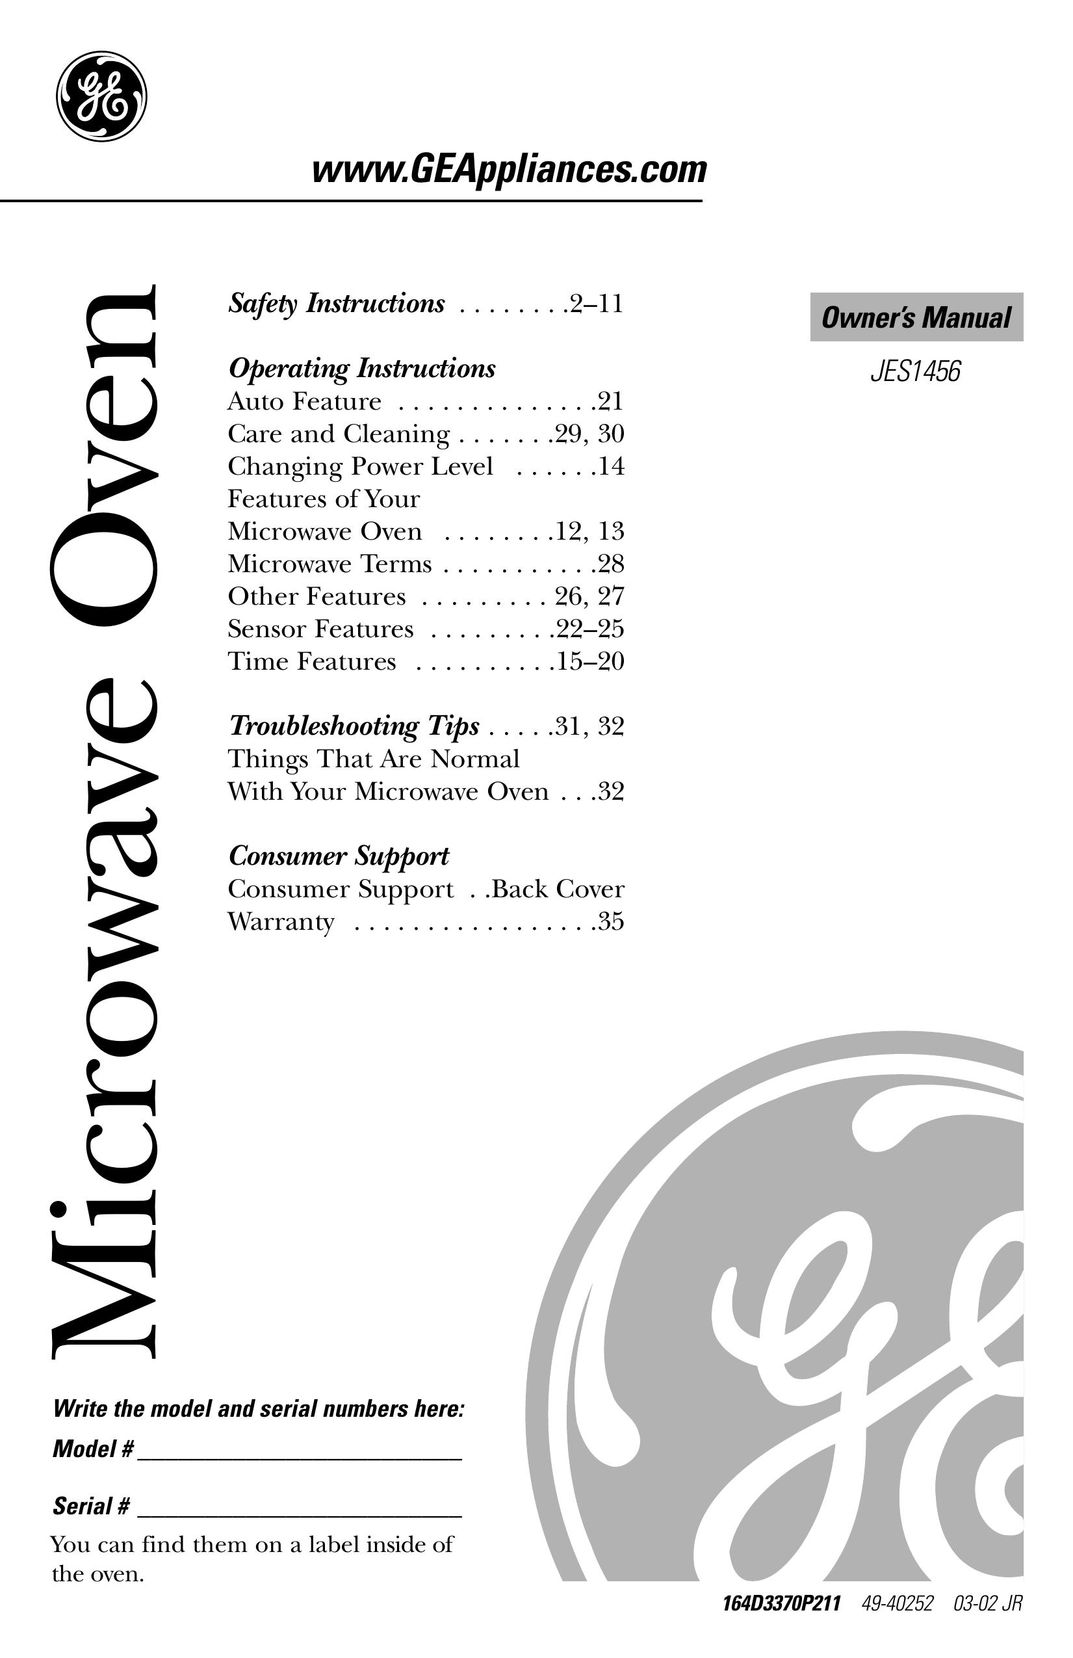 GE 164D3370P211 Microwave Oven User Manual